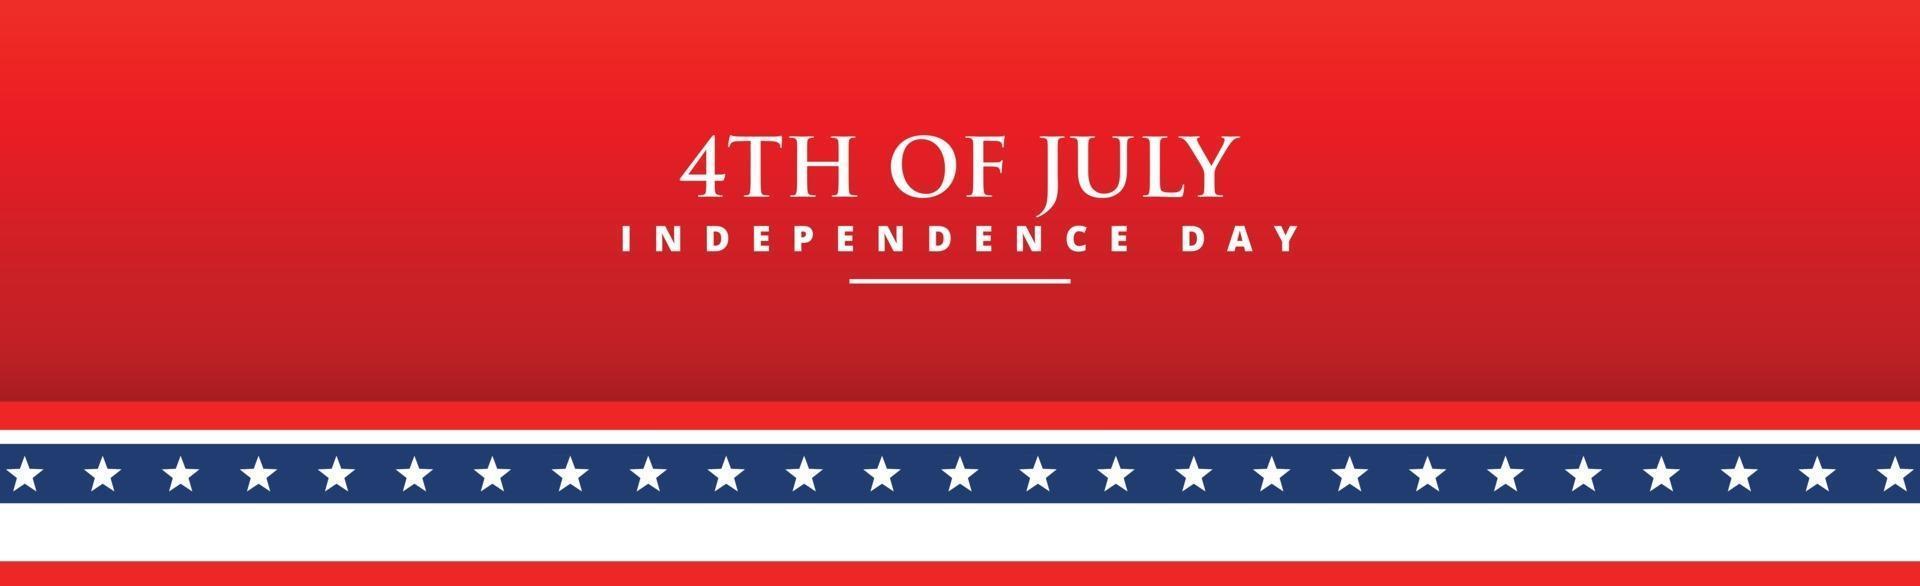 Red background holiday 4th of July USA Independence Day vector